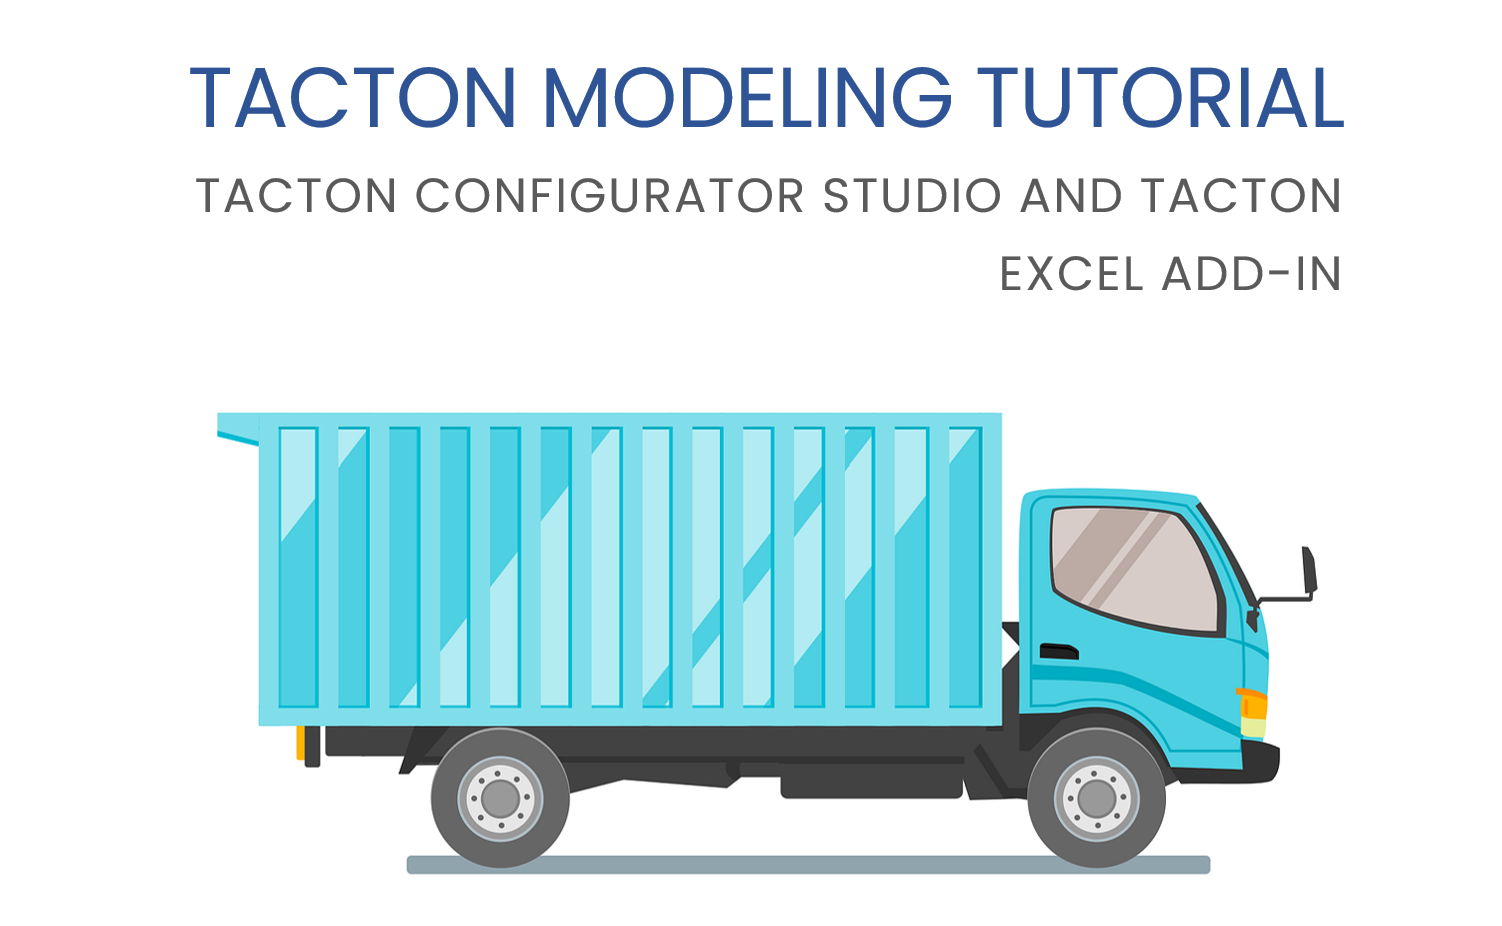 Tacton modeling tutorial from cpq.se